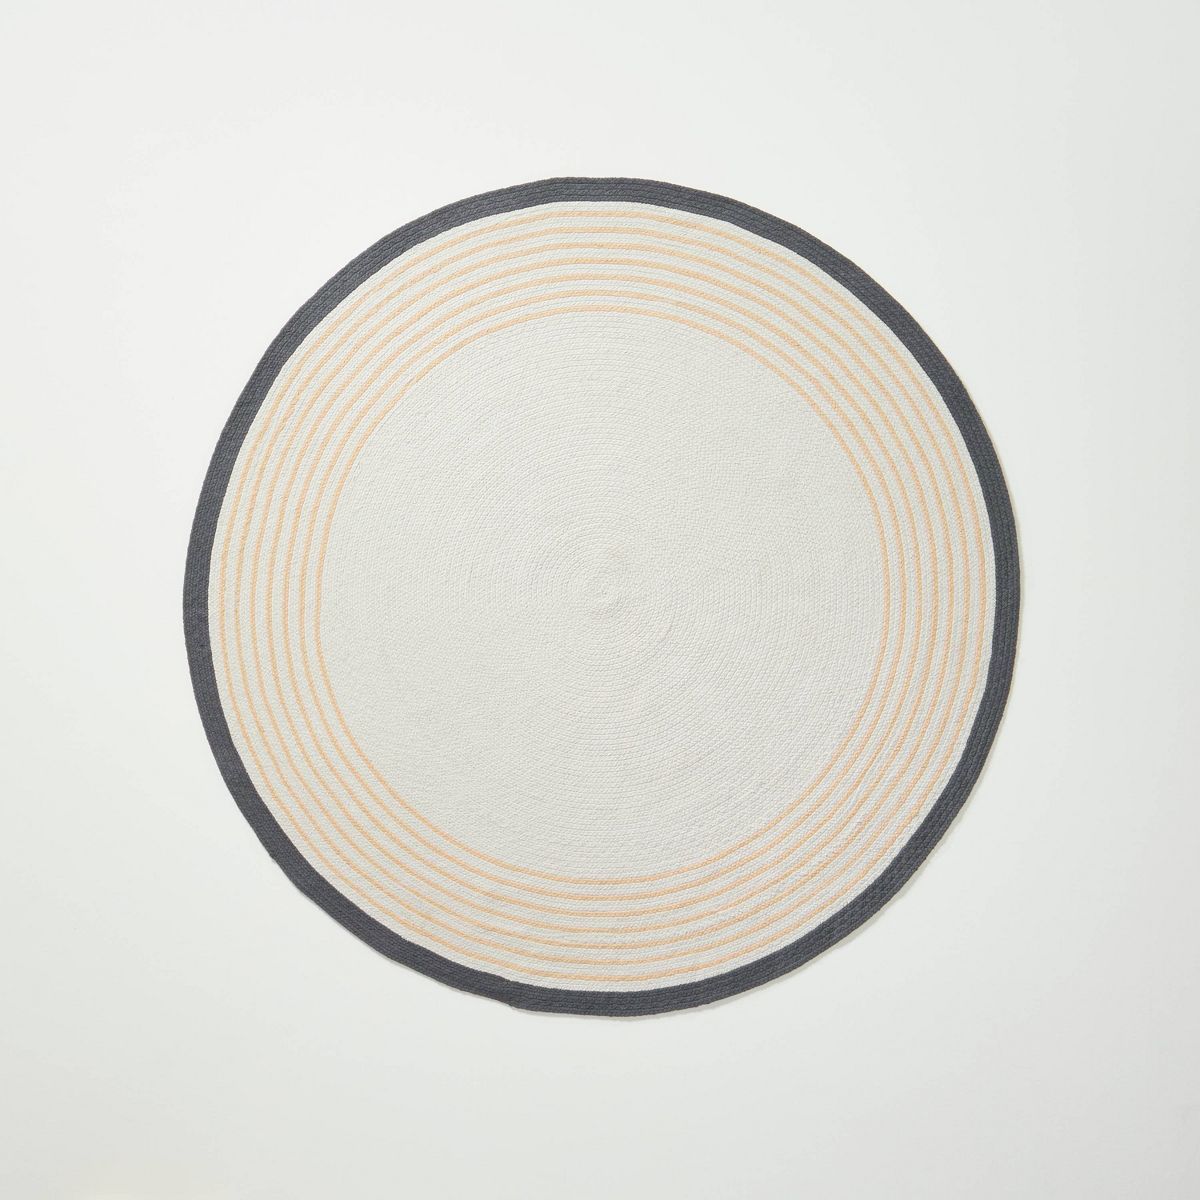 Round 6' Border Stripe Braided Area Rug Neutral - Hearth & Hand™ with Magnolia | Target